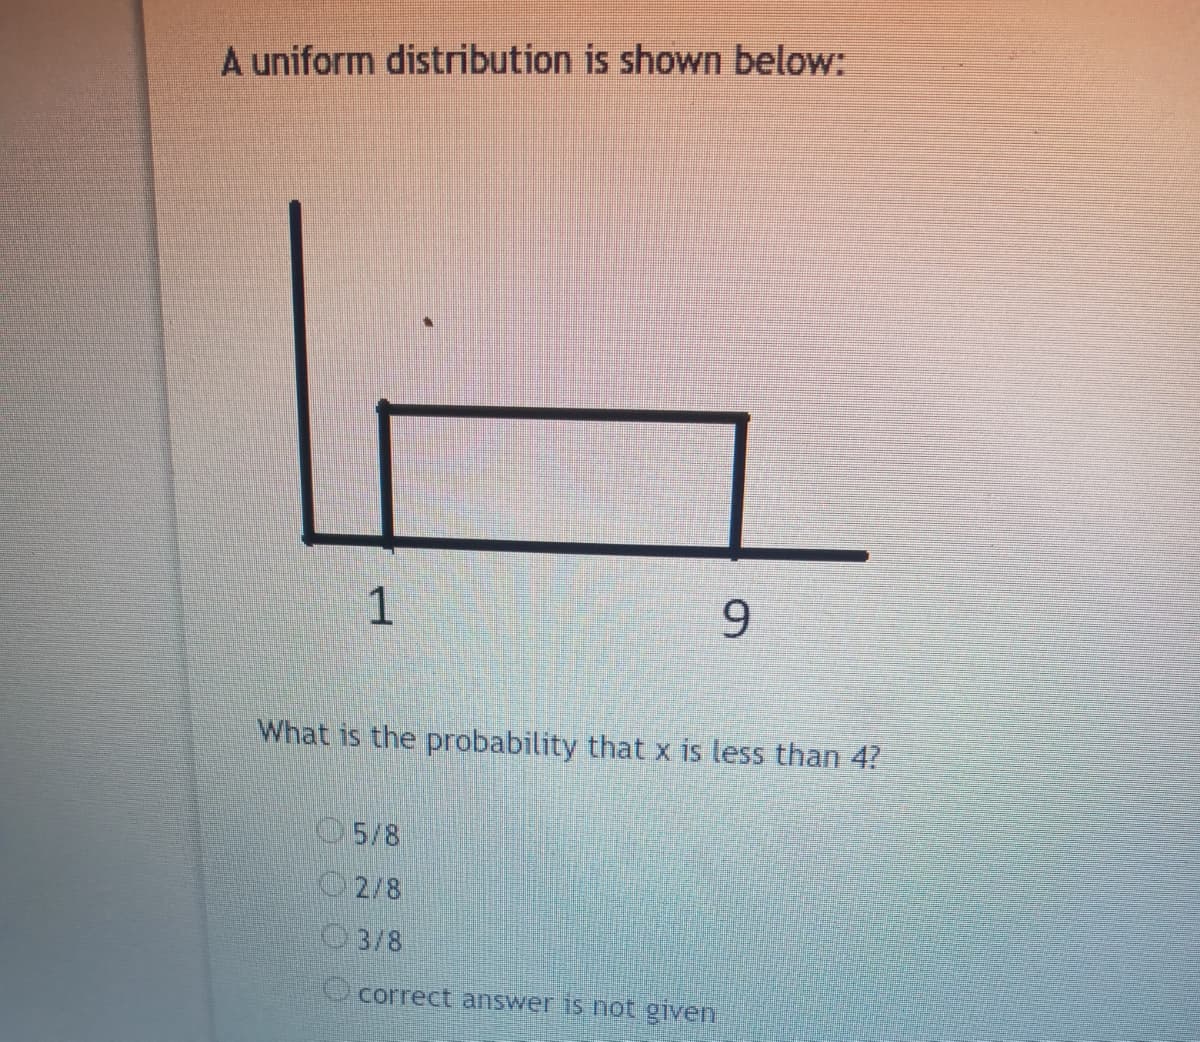 A uniform distribution is shown below:
1
9
What is the probability that x is less than 4?
5/8
2/8
O3/8
correct answer is not given
